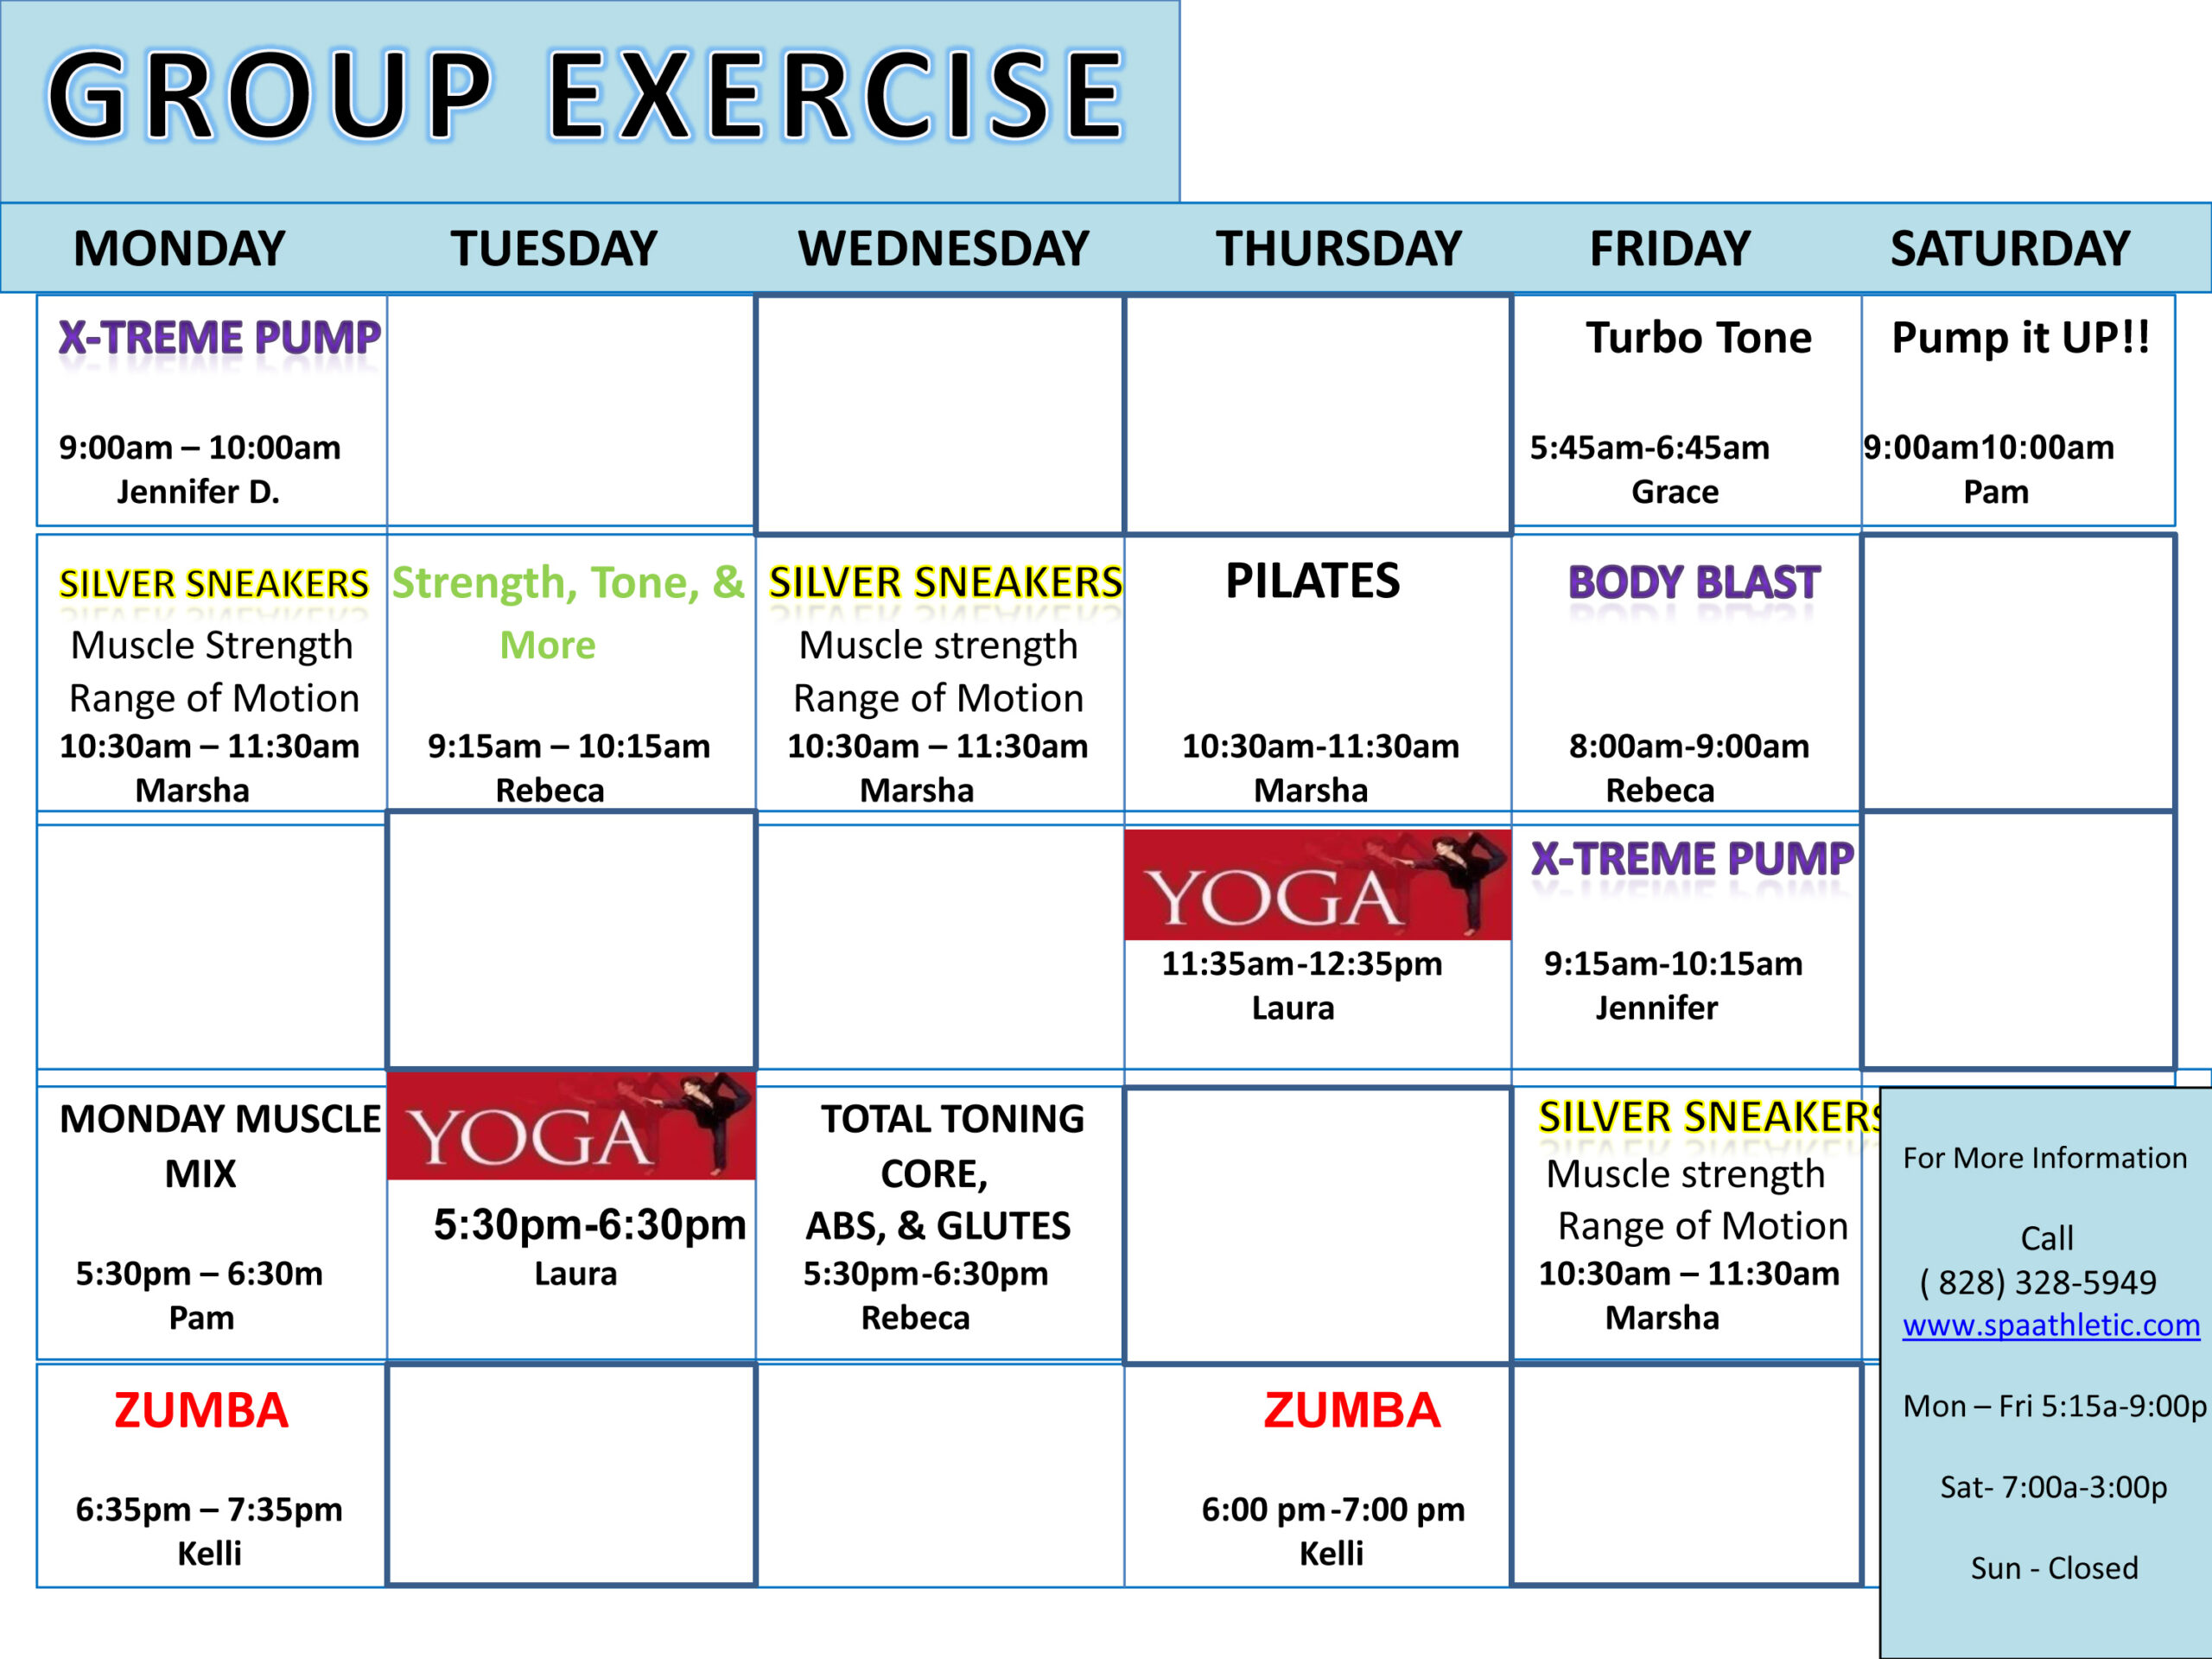 Group Exercise Schedule